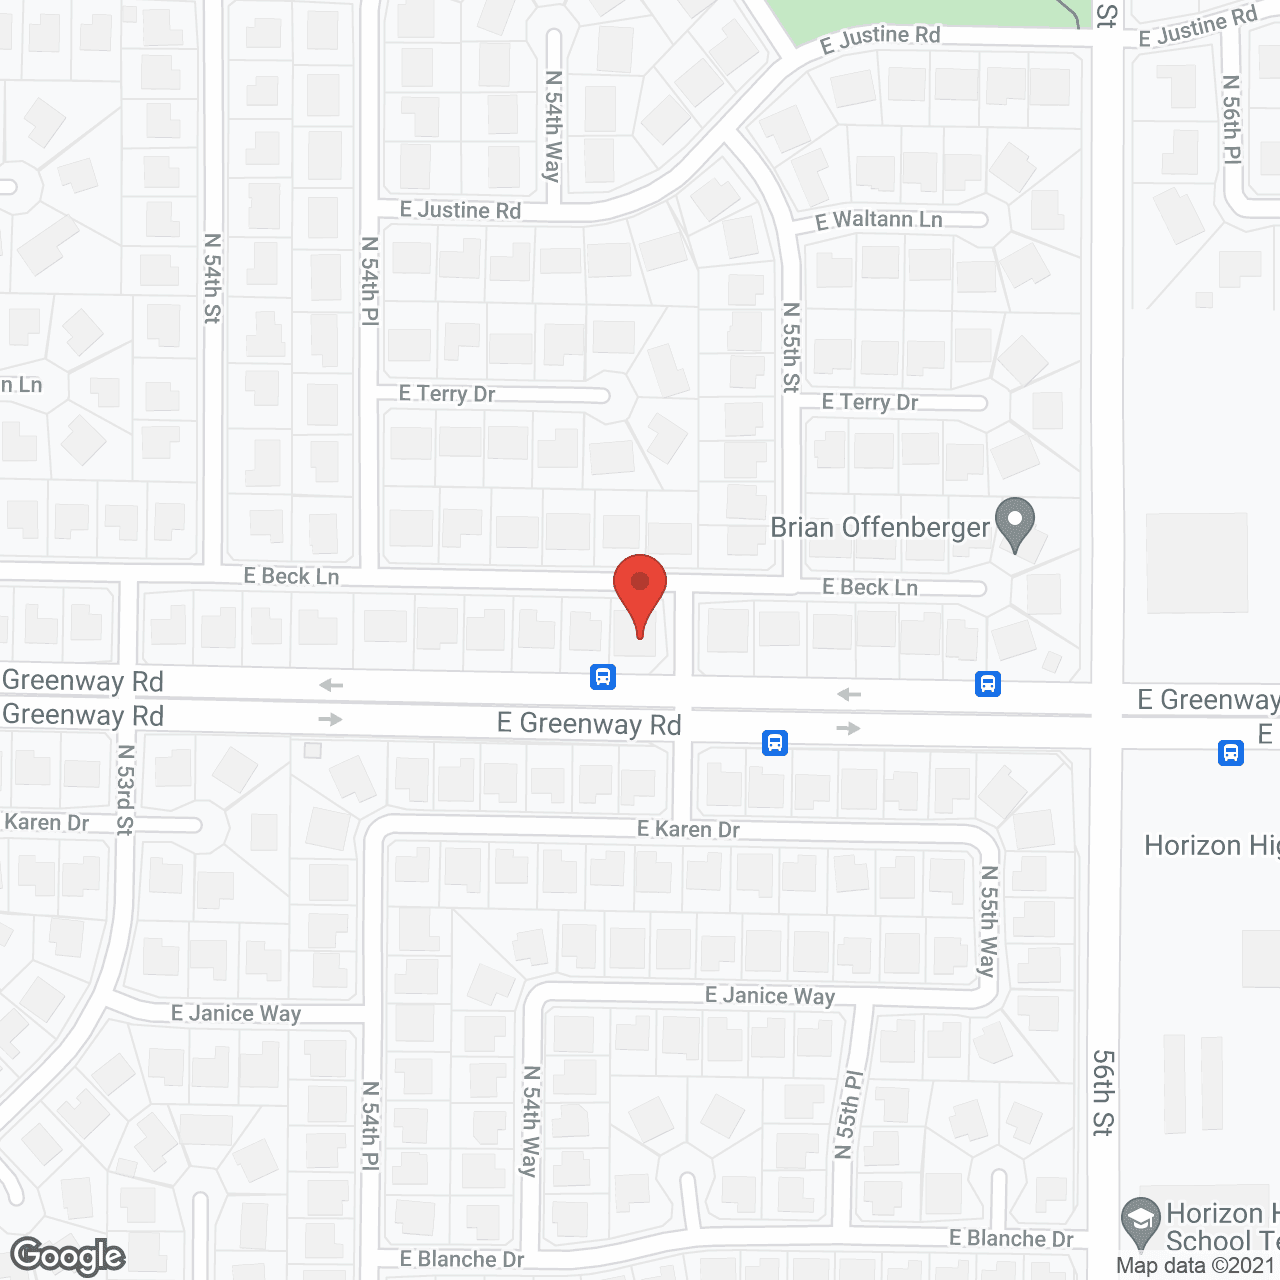 24 Hour Group Home in google map